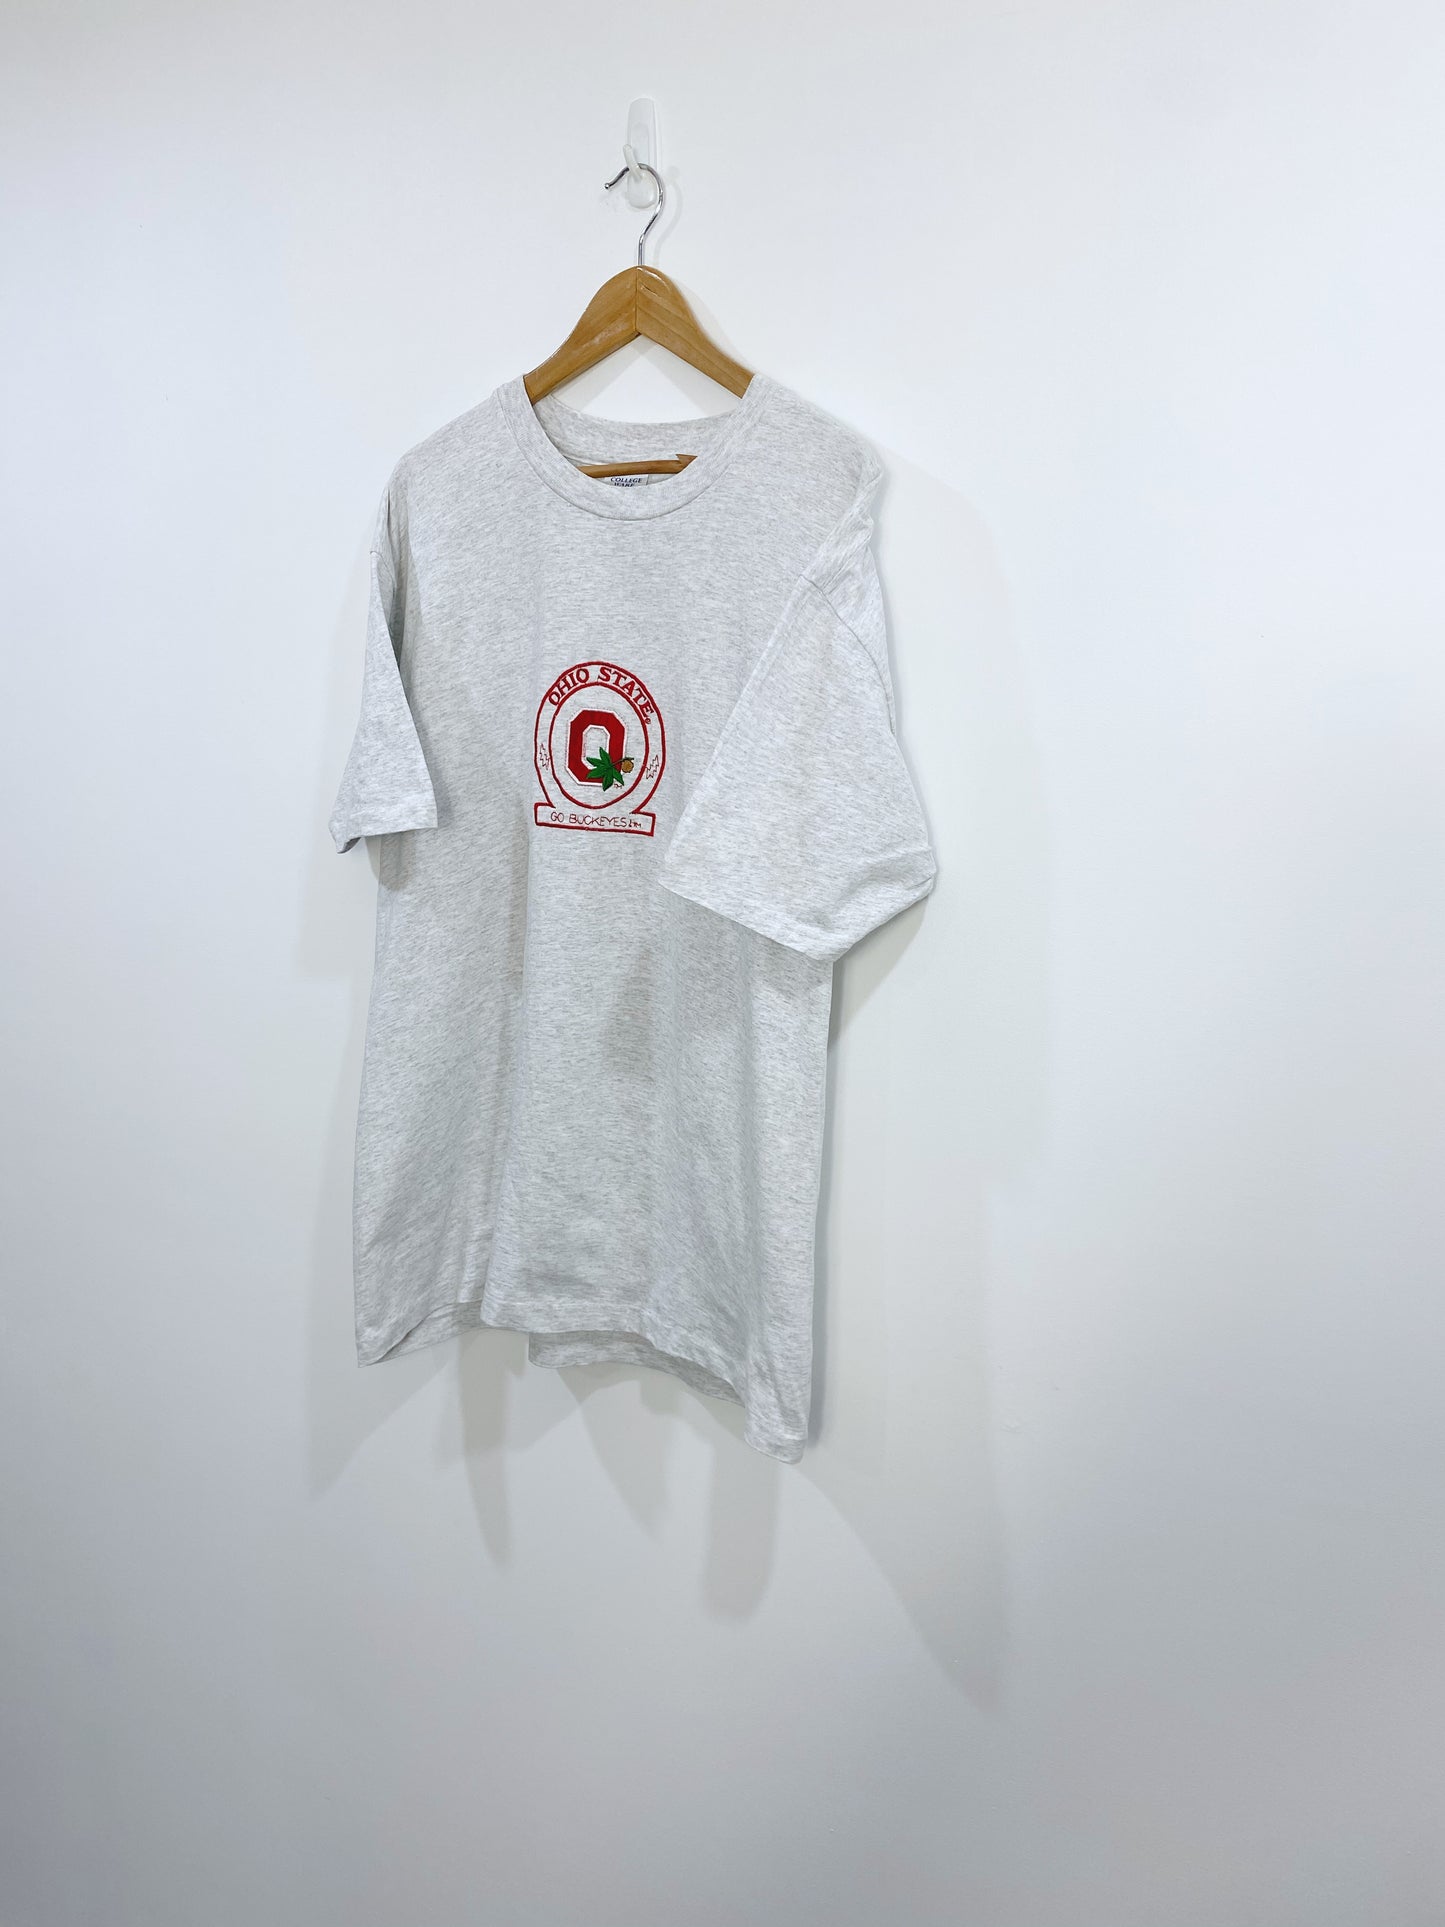 Vintage Ohio State BuckEyes Embroidered T-shirt L